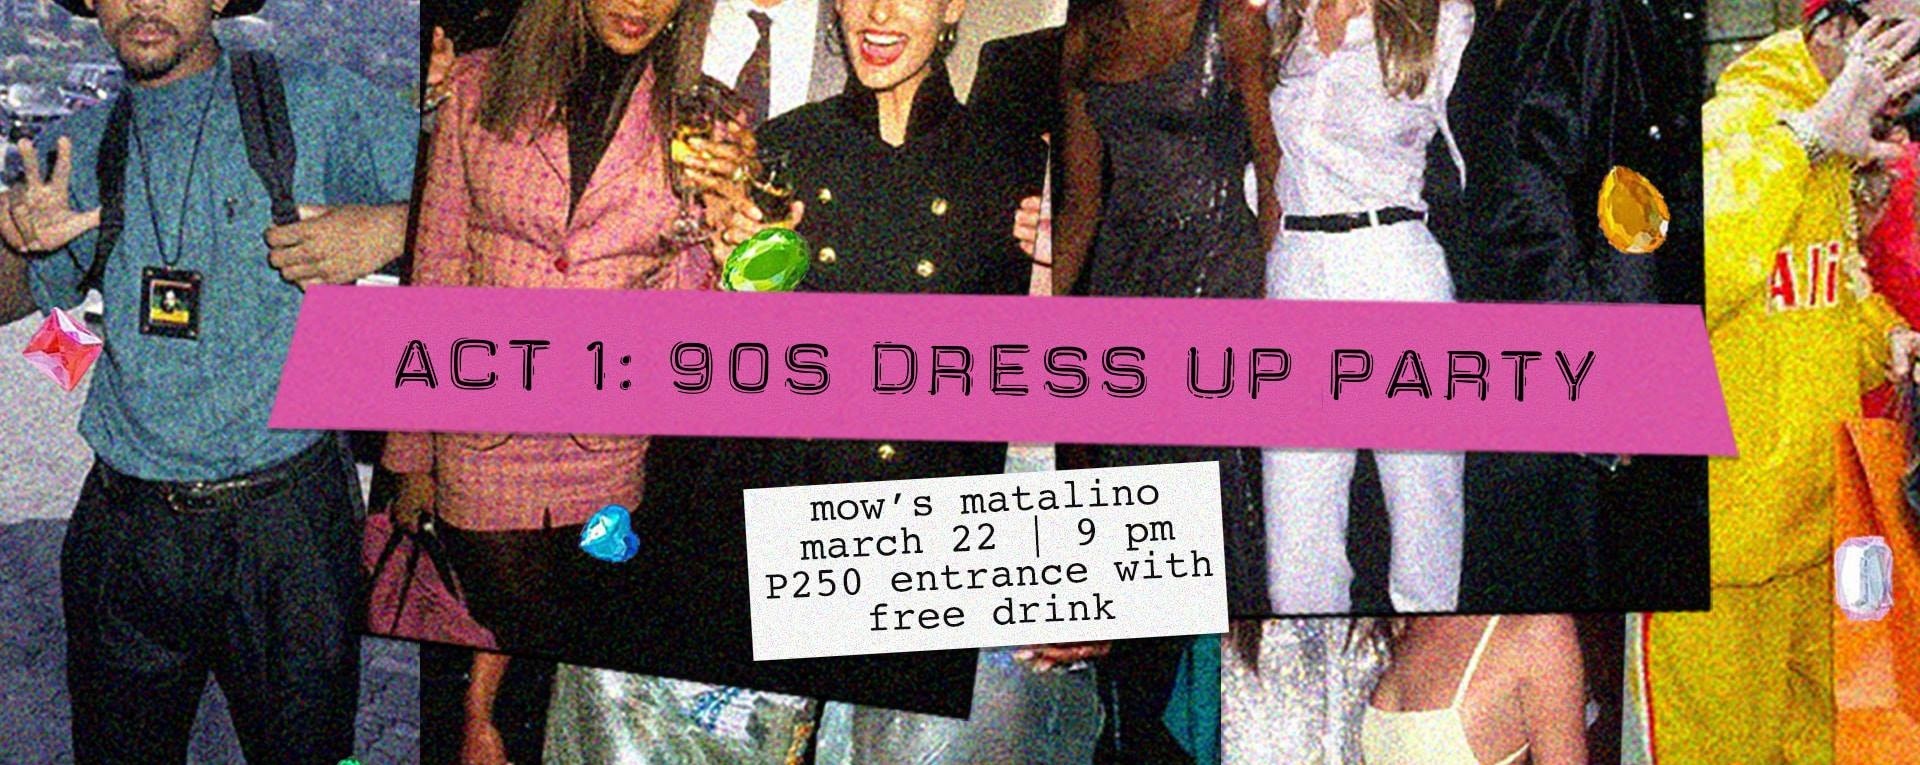 ACT 1: 90s DRESS UP PARTY